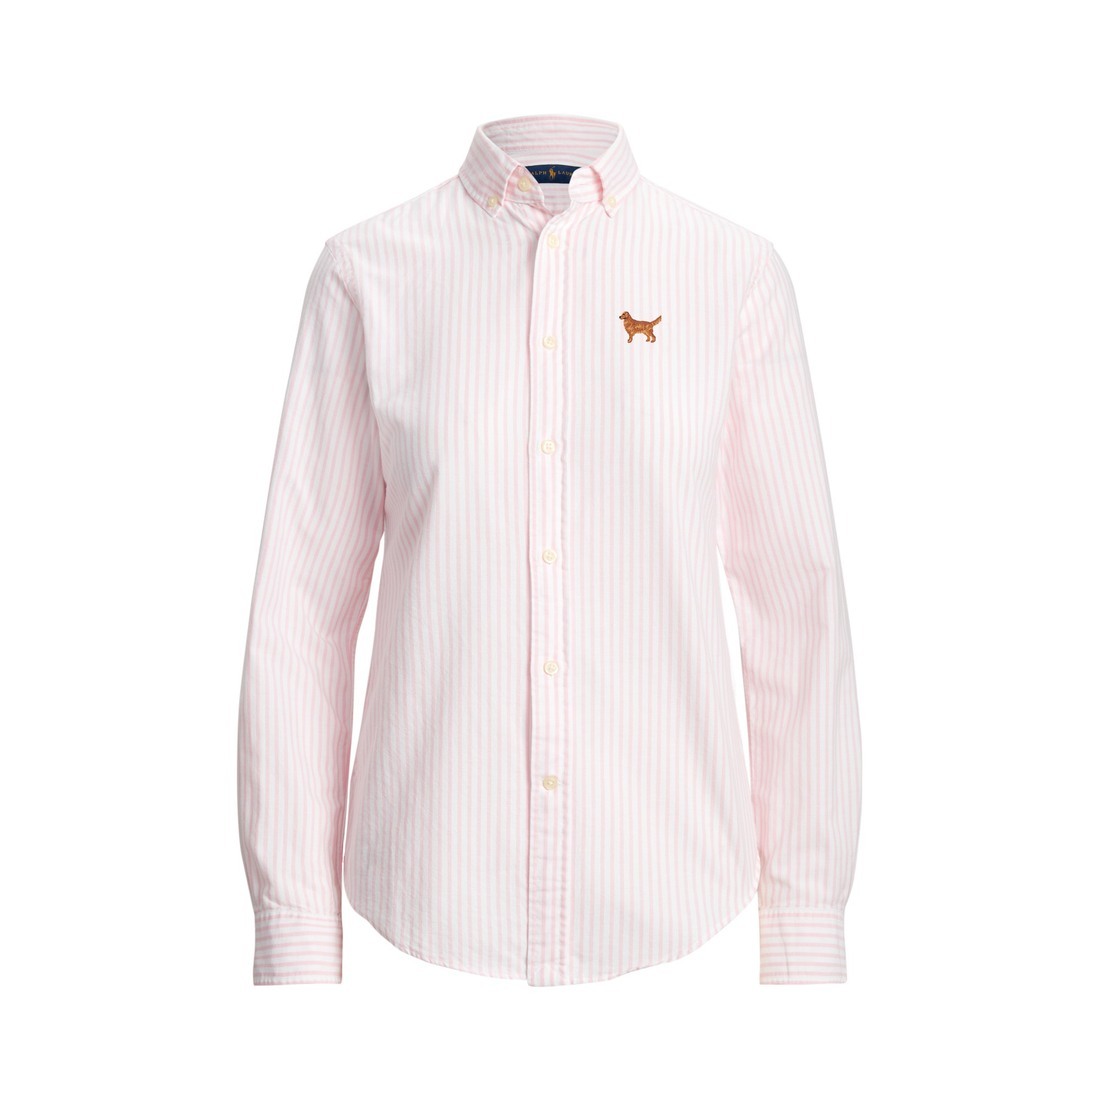 Create Your Own Women's Oxford Shirt